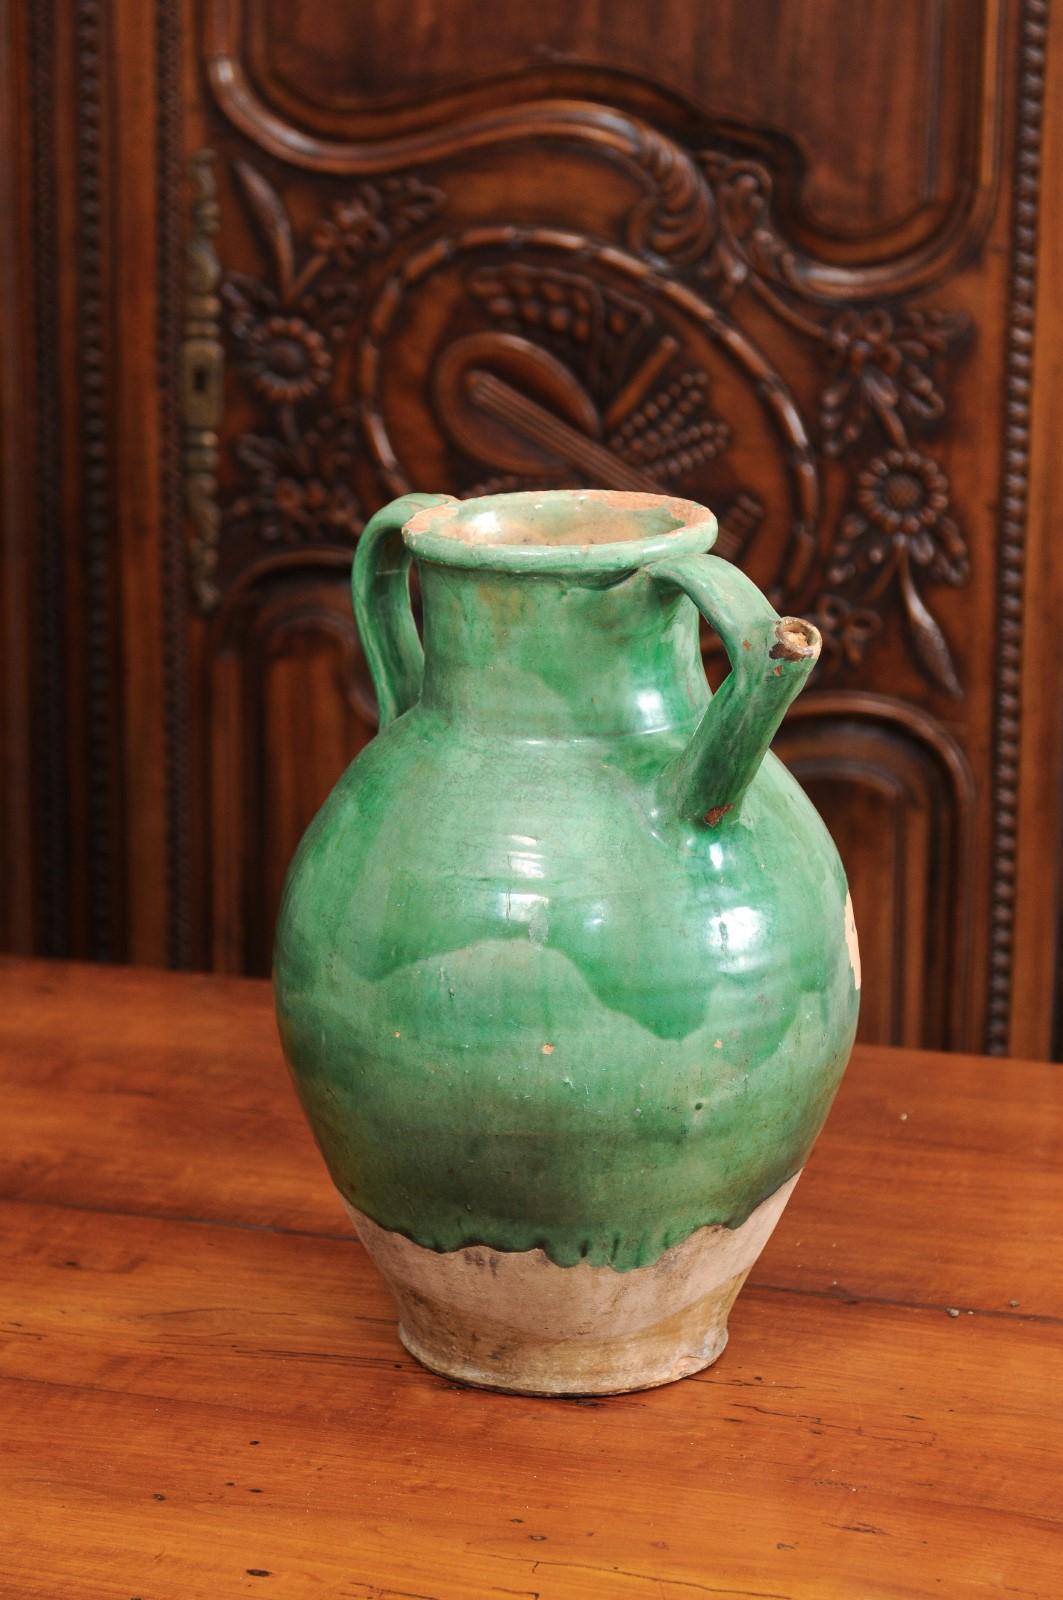 A French provincial green glazed pottery jug from the 19th century, with double handles, front spout and unfinished base. Created in France during the 19th century, this jug features a green glazed body showcasing a nicely distressed patina.